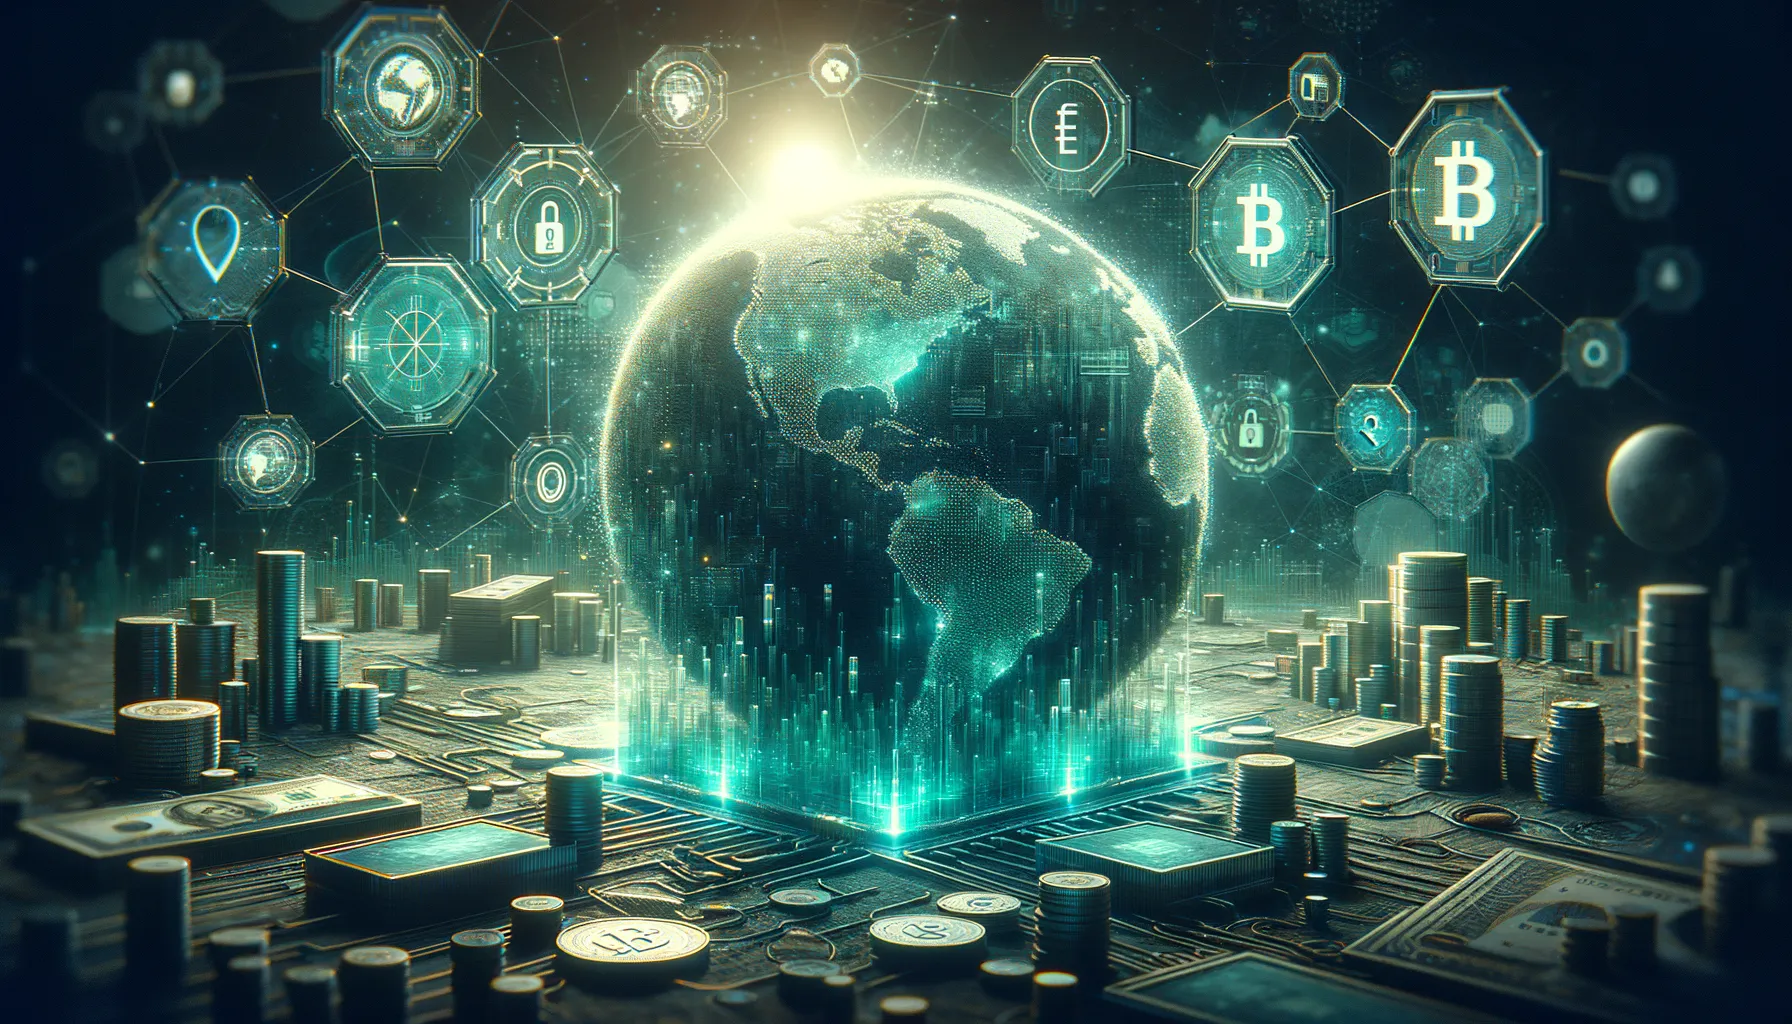 Detailed digital illustration exploring blockchain's impact on finance, with dark atmosphere and teal accents.